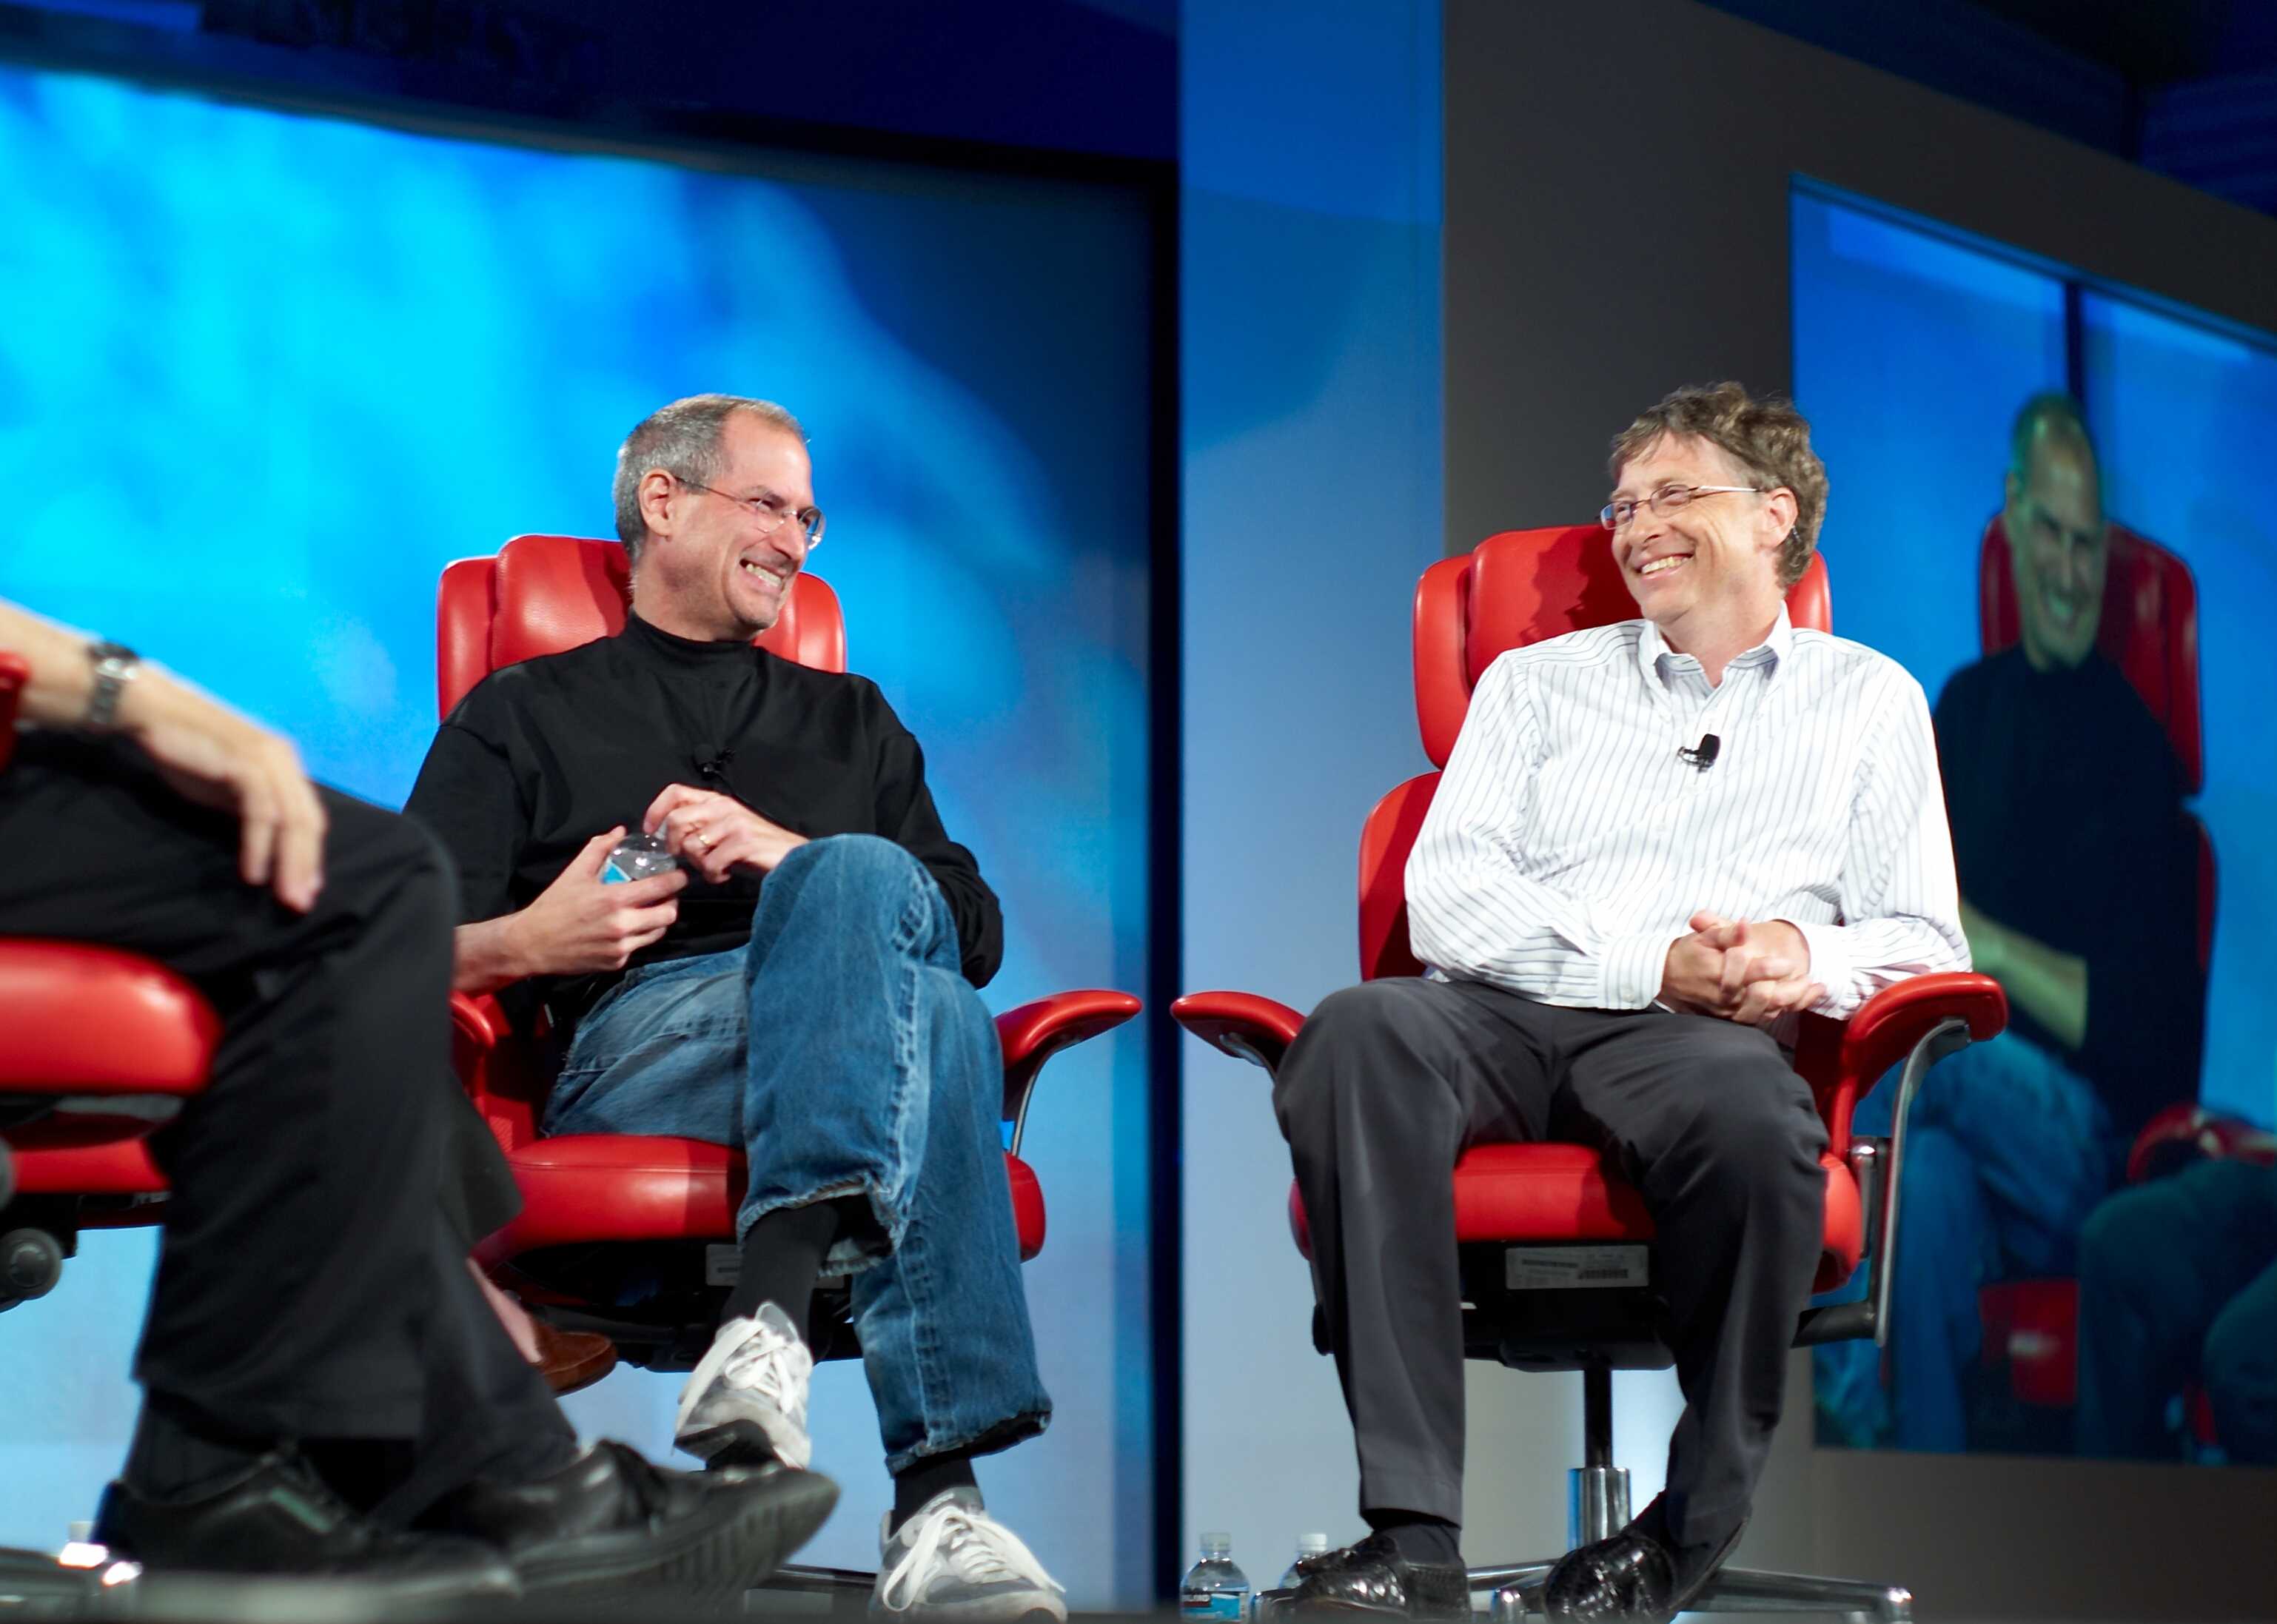 Steve Jobs and Bill Gates, rivals and friends.